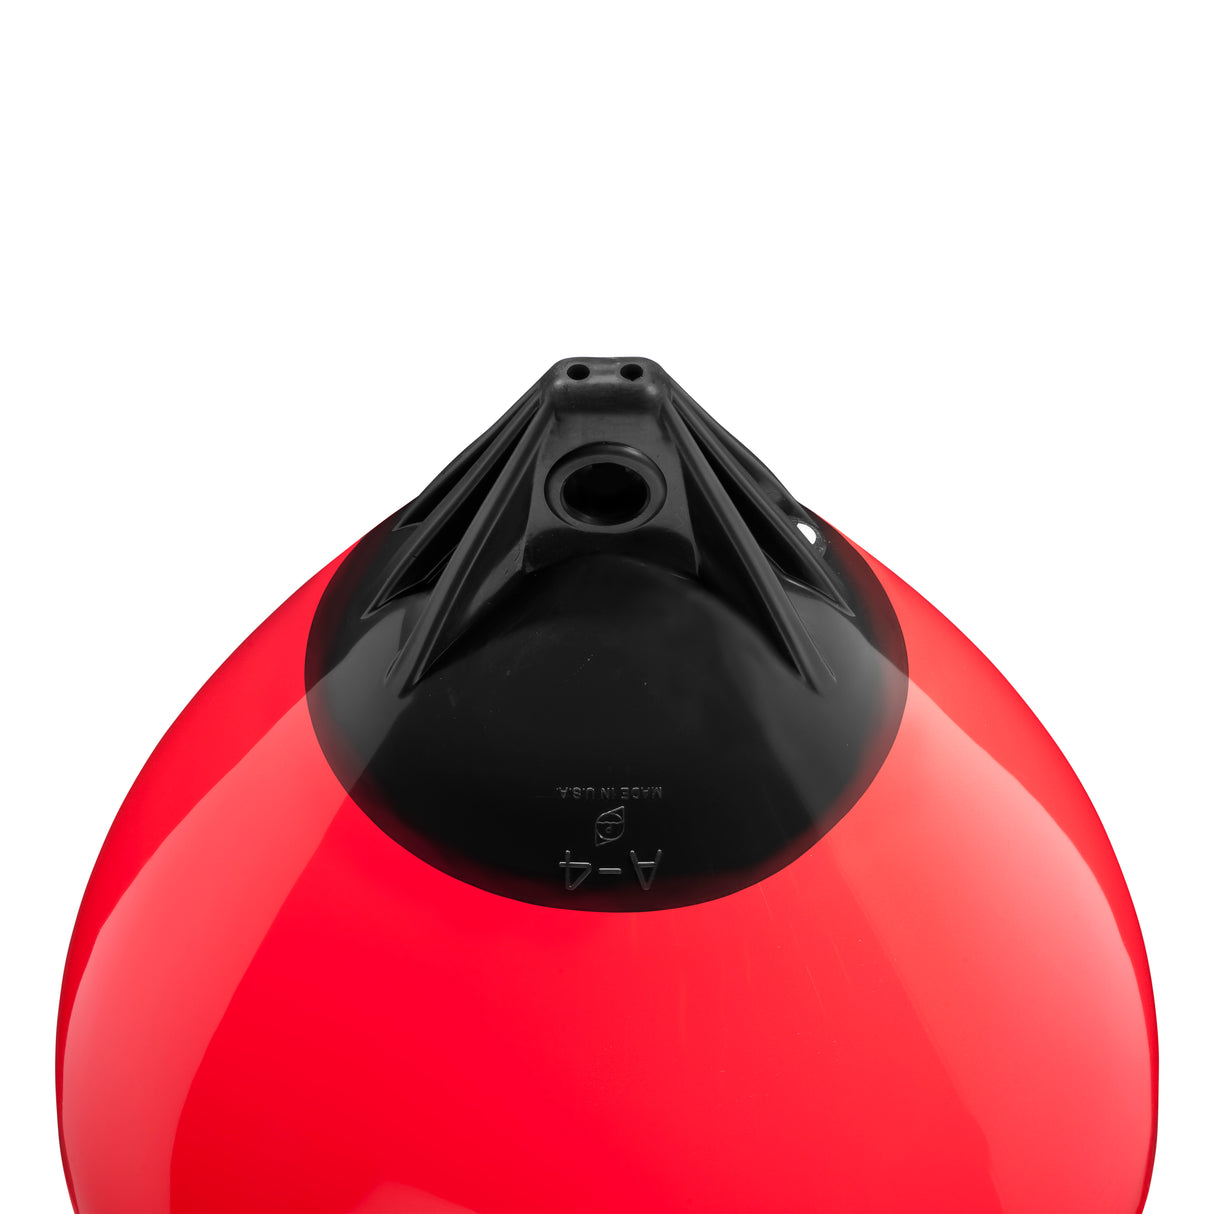 Red buoy with Black-Top, Polyform A-4 angled shot